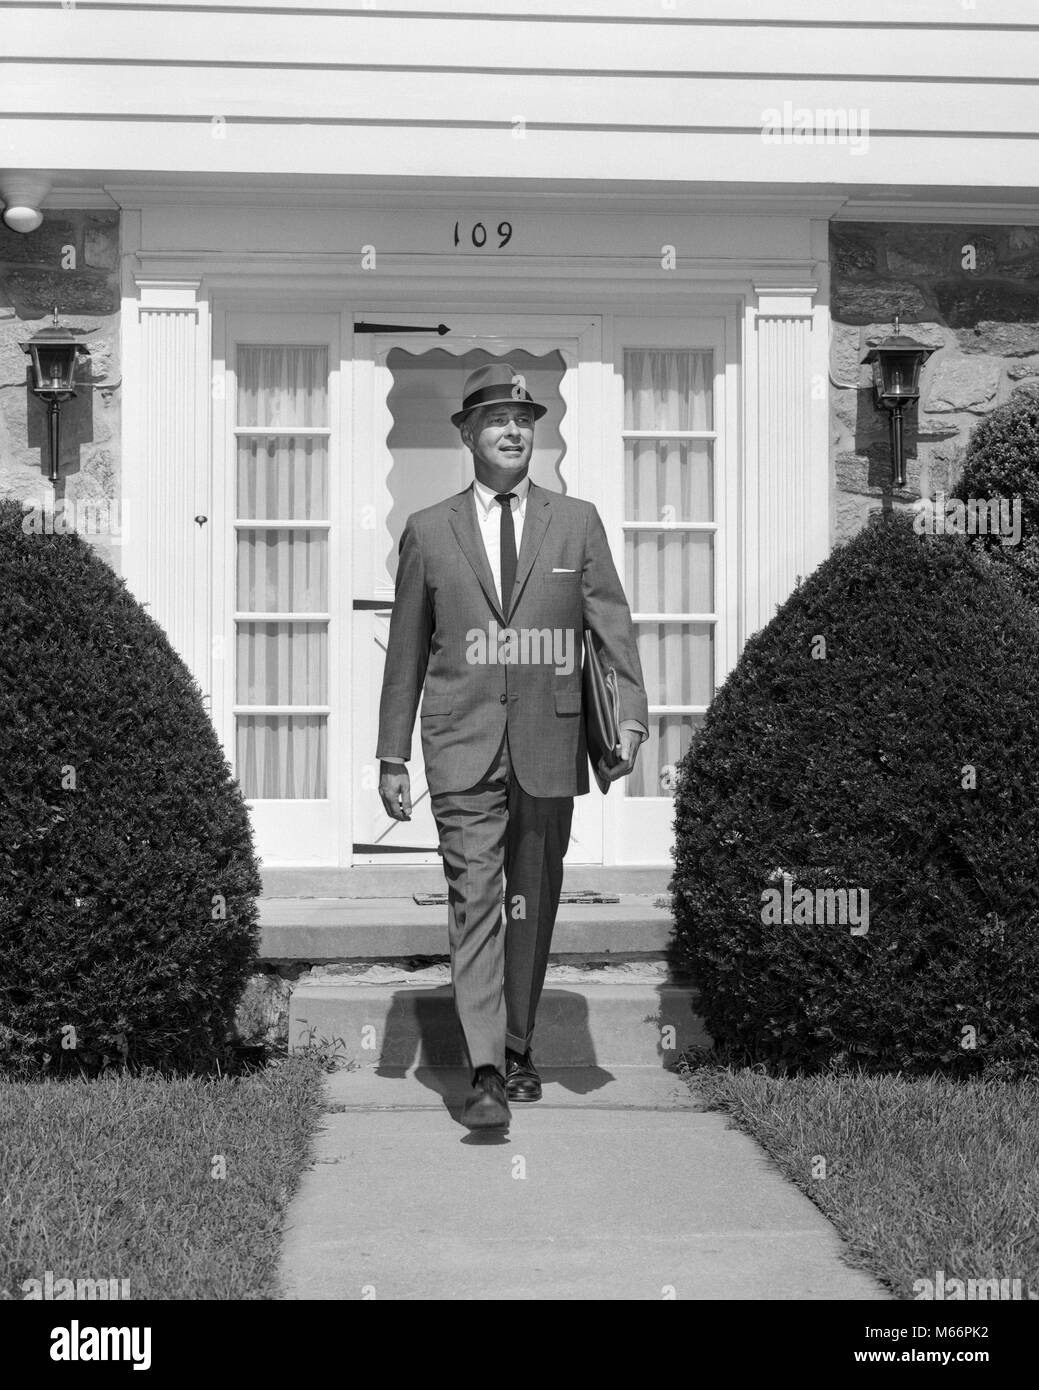 1950s BUSINESSMAN LEAVING SUBURBAN HOUSE HOLDING BRIEFCASE WALKING DOWN SIDEWALK - s15579 HAR001 HARS CAUCASIAN PLEASED LIFESTYLE SALESPERSON GROWNUP HEALTHINESS ONE PERSON ONLY HOME LIFE COPY SPACE FULL-LENGTH GROWN-UP PROFESSION CONFIDENCE NOSTALGIA MORNING 35-40 YEARS 40-45 YEARS WHITE COLLAR OCCUPATION HAPPINESS STYLES PRIDE SMILES FASHIONS SALESMEN MALES MID-ADULT MID-ADULT MAN B&W BLACK AND WHITE CAUCASIAN ETHNICITY DOOR TO DOOR GOING TO WORK OCCUPATIONS OLD FASHIONED PERSONS PORTFOLIO TOWARDS CAMERA Stock Photo